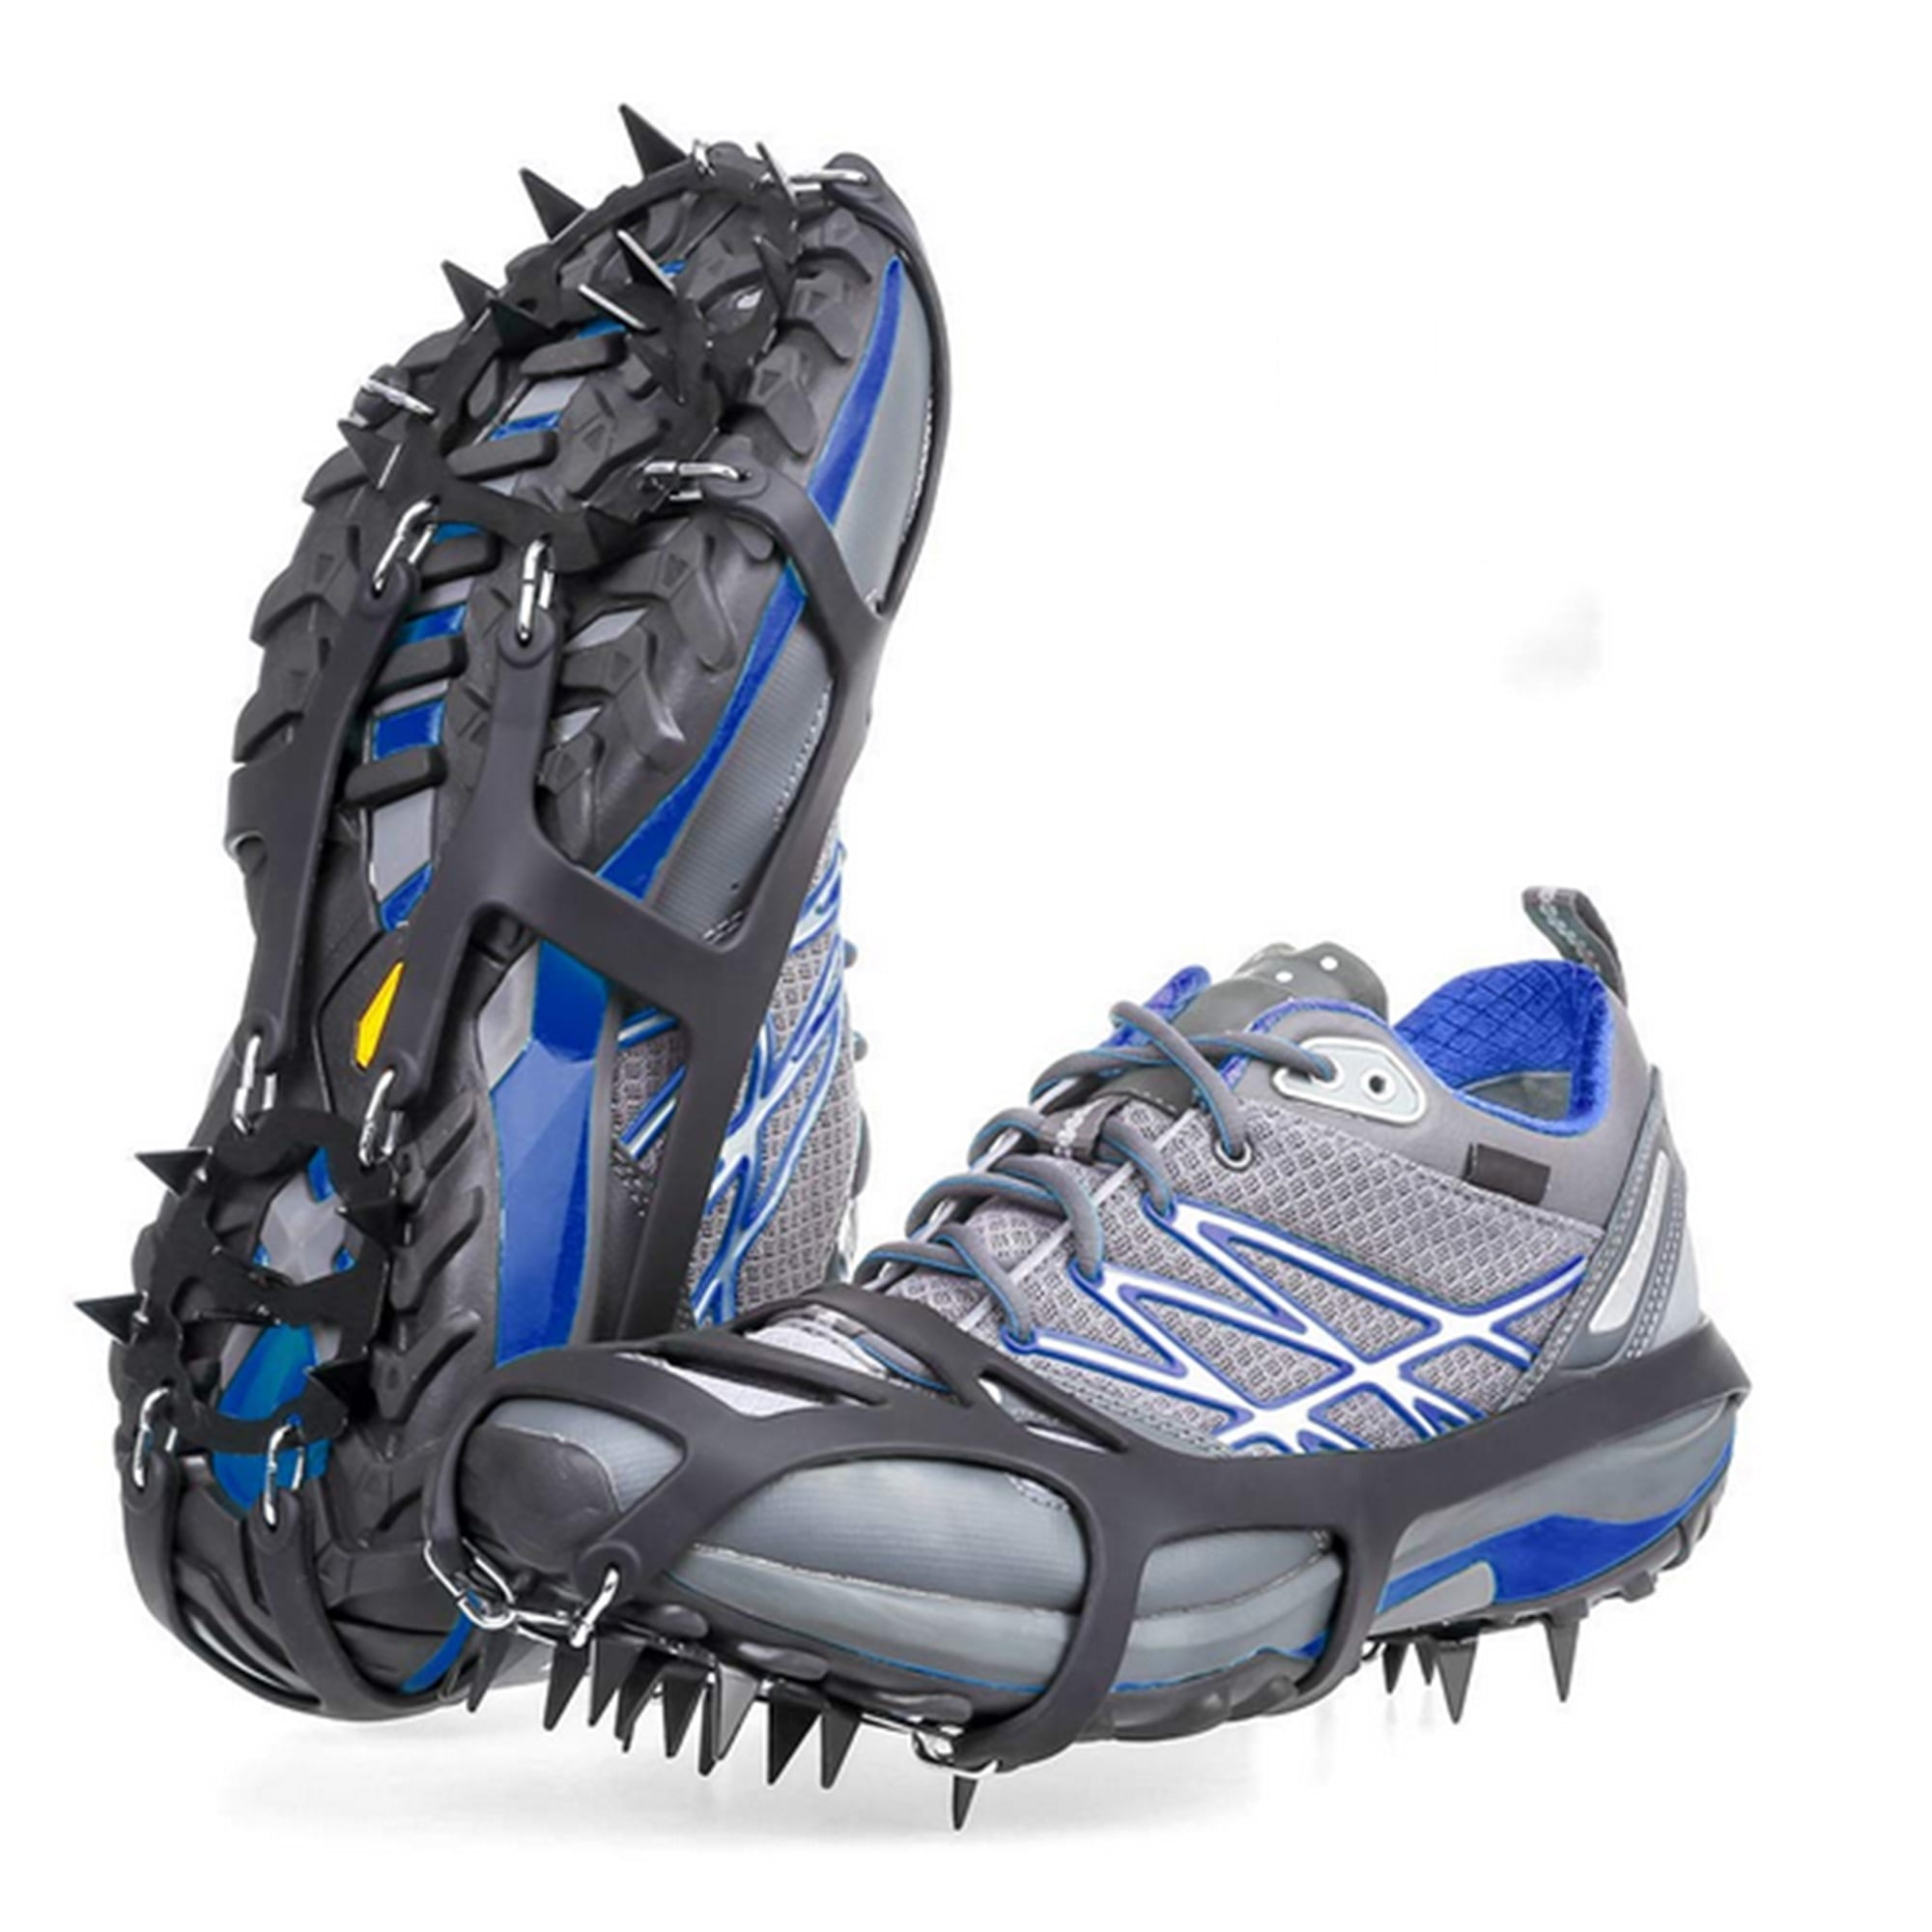 IceTrack Large Shoe and Boot Ice Snow Chains Crampons Grip Anti Slip Spikes 